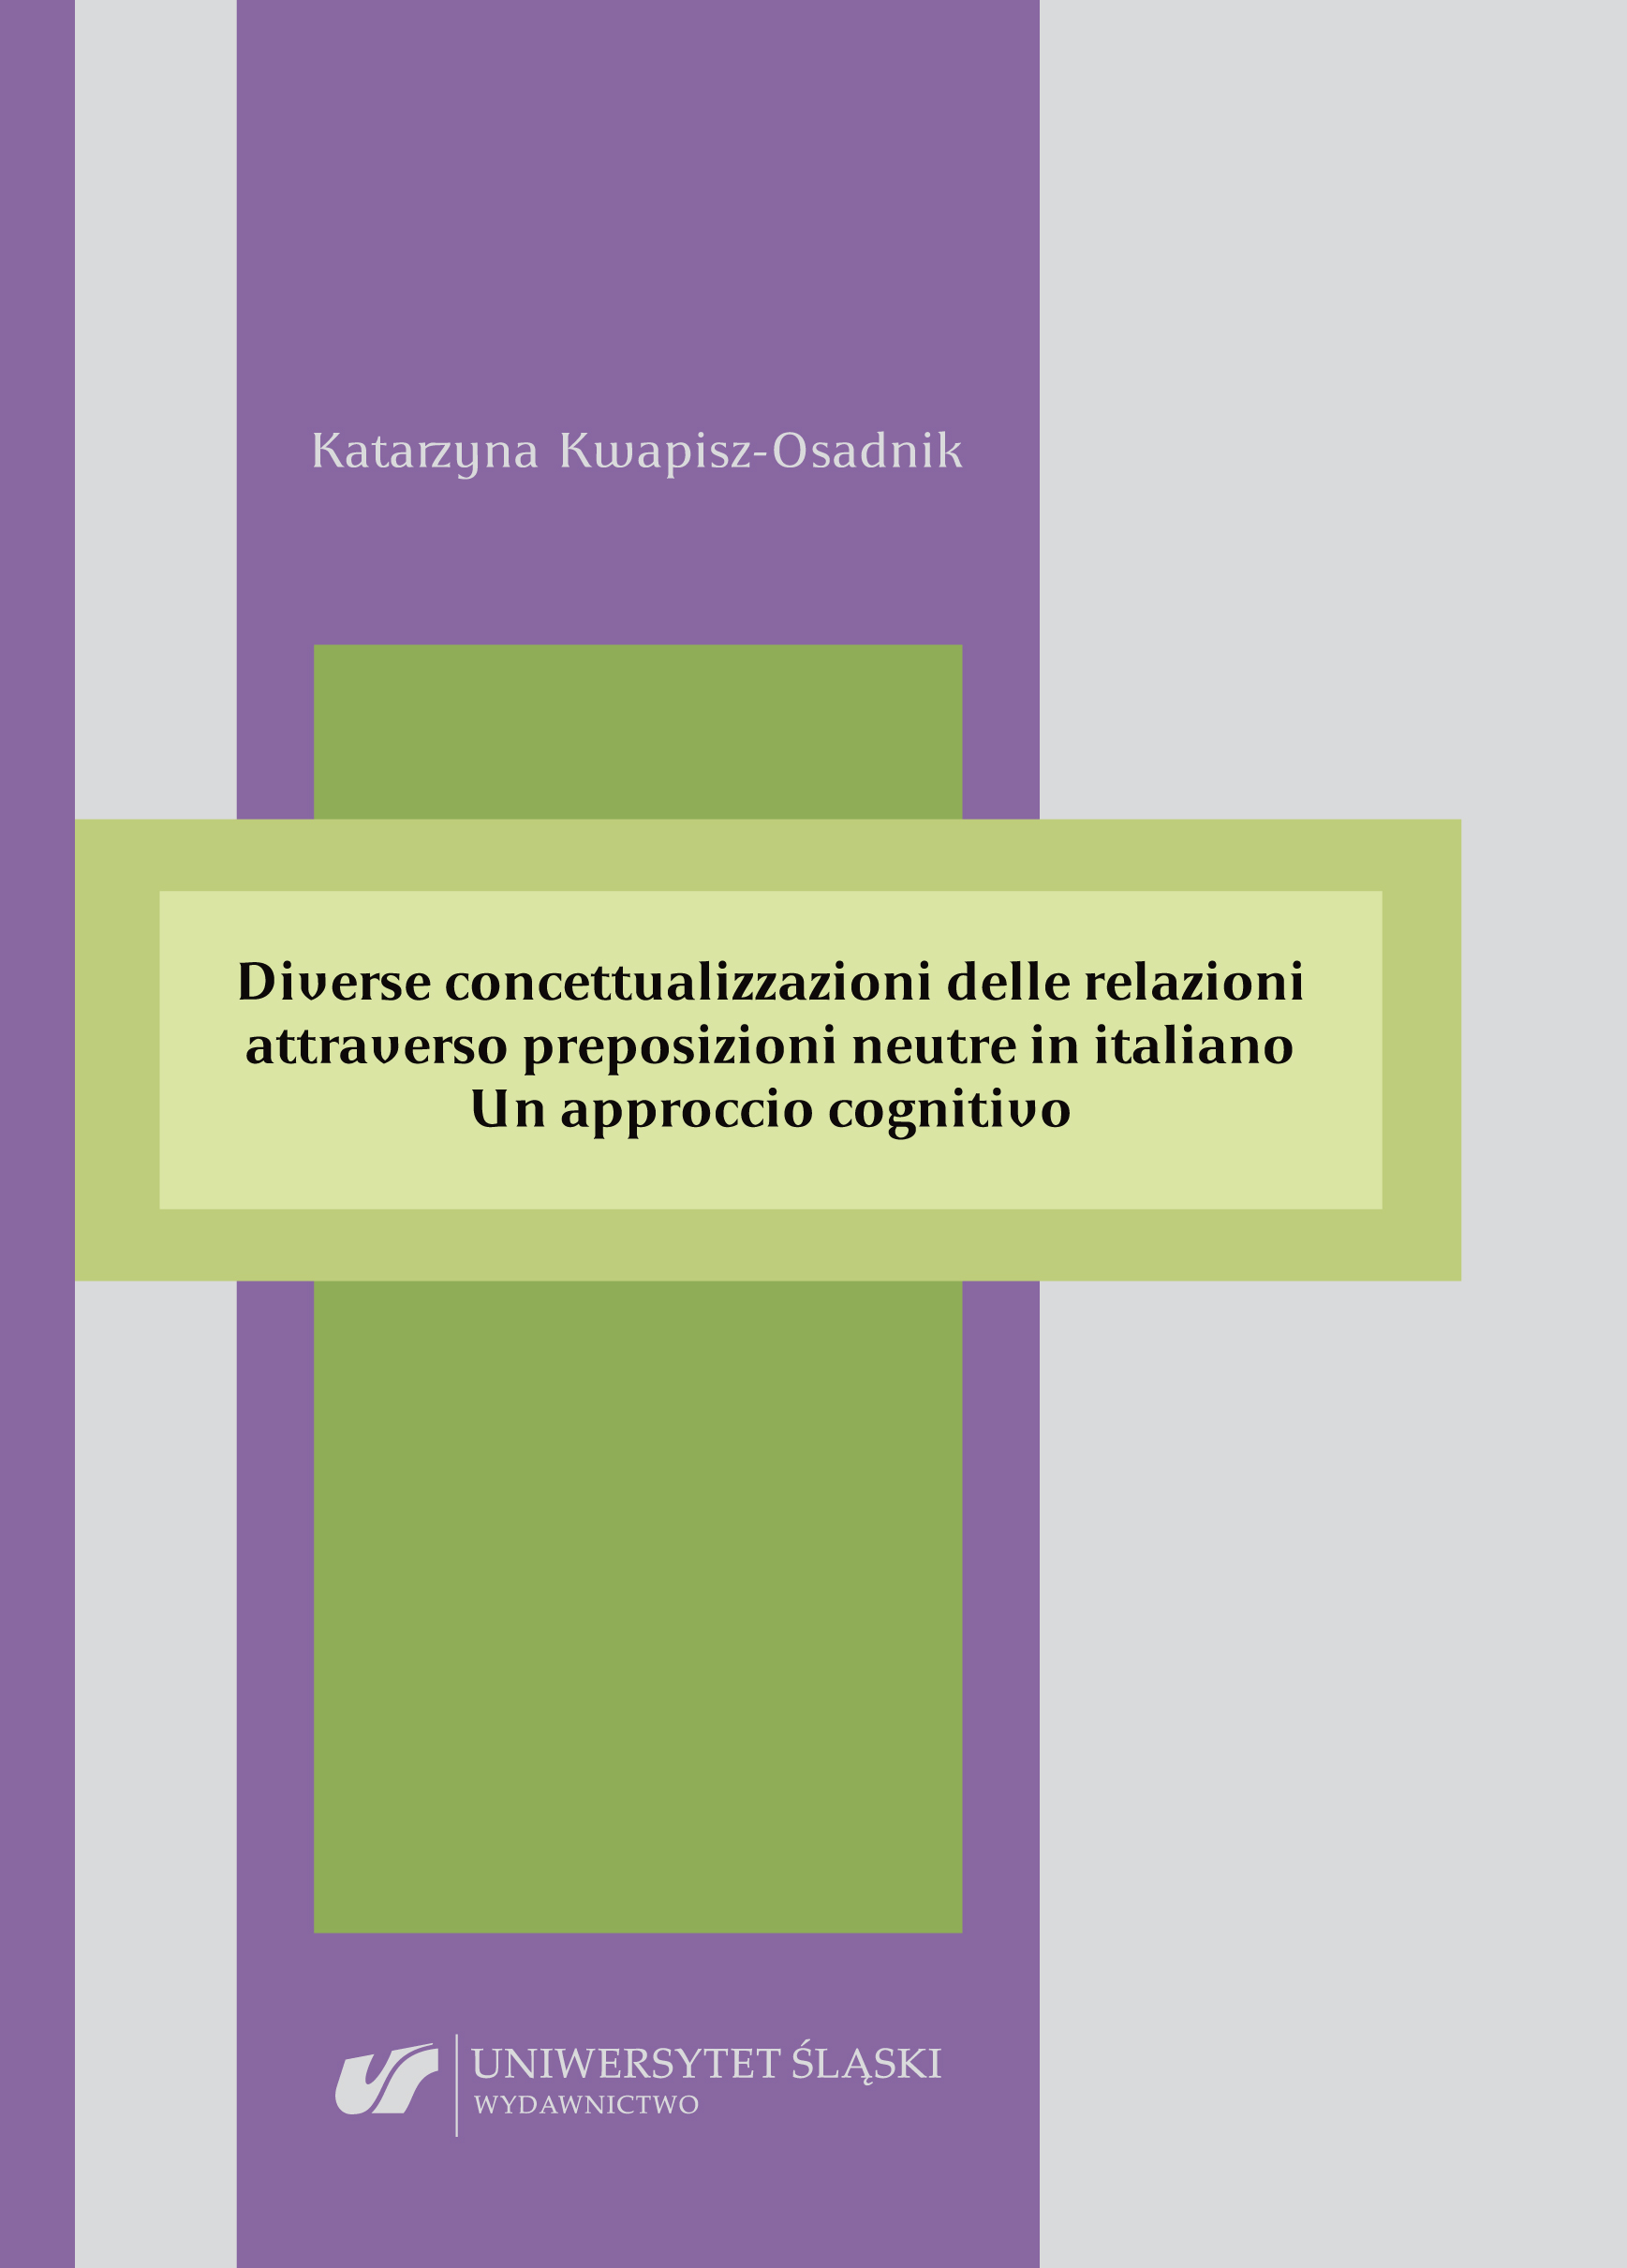 Different conceptualizations of relations through neutral prepositions in Italian. A cognitive approach Cover Image